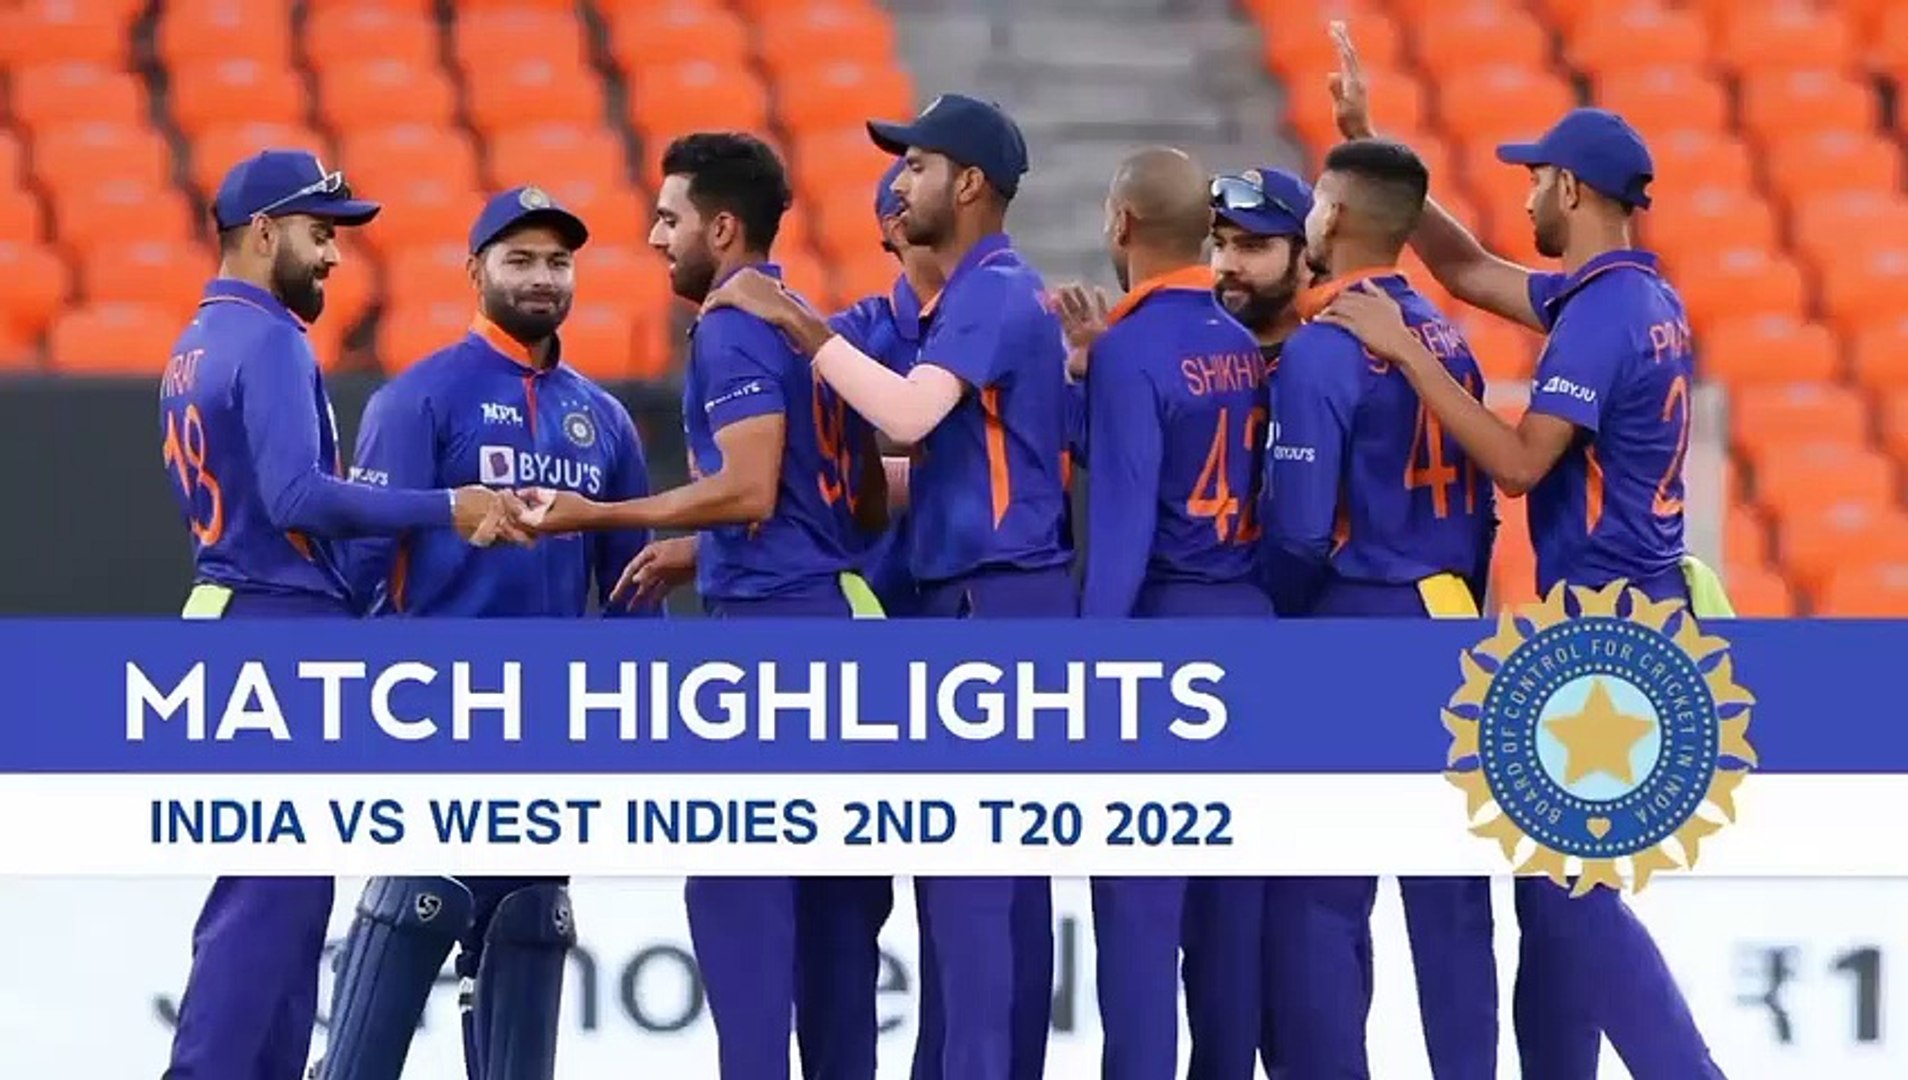 India vs west indies highlights 2022